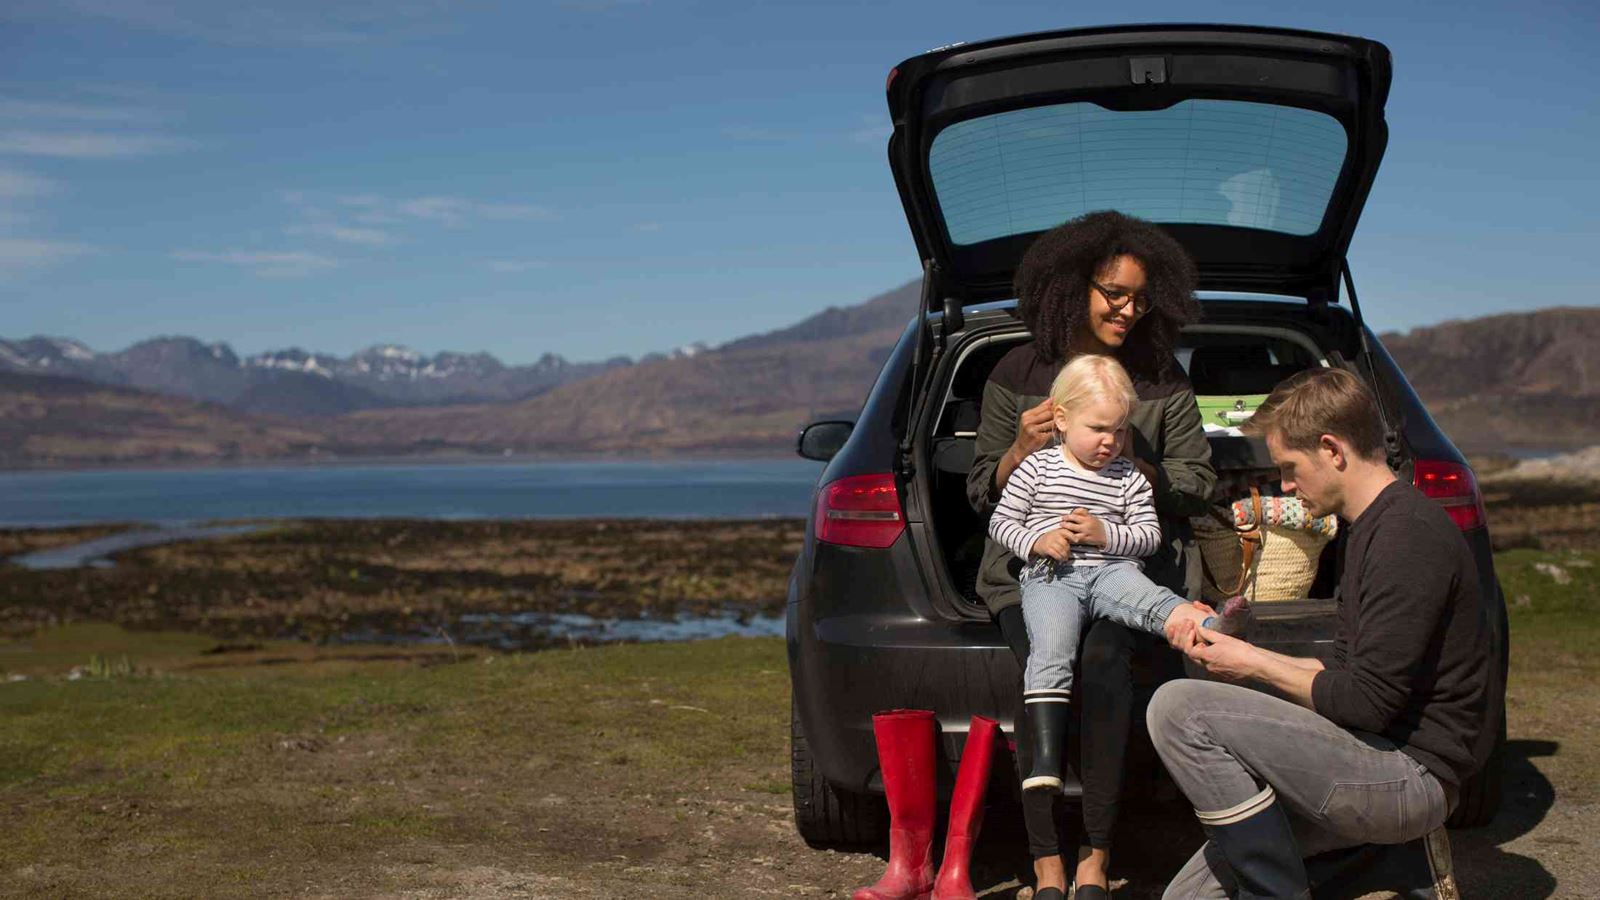 Mum, dad and young child changing shoes in the back of their car in the countryside with mountain scenery behind them